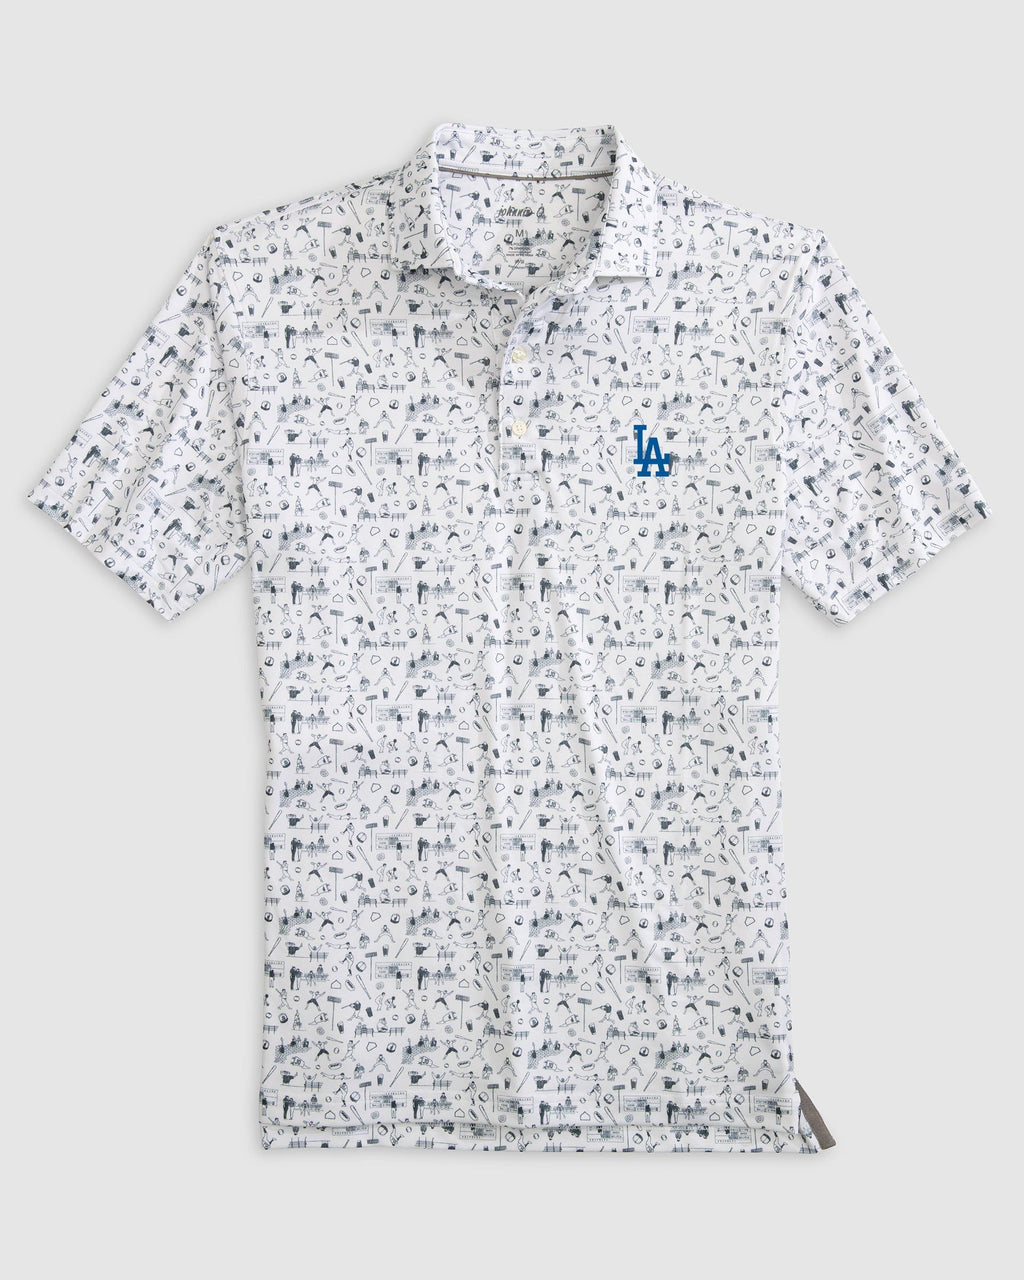 MLB Los Angeles Dodgers Men's Short Sleeve Button-Down Jersey - S